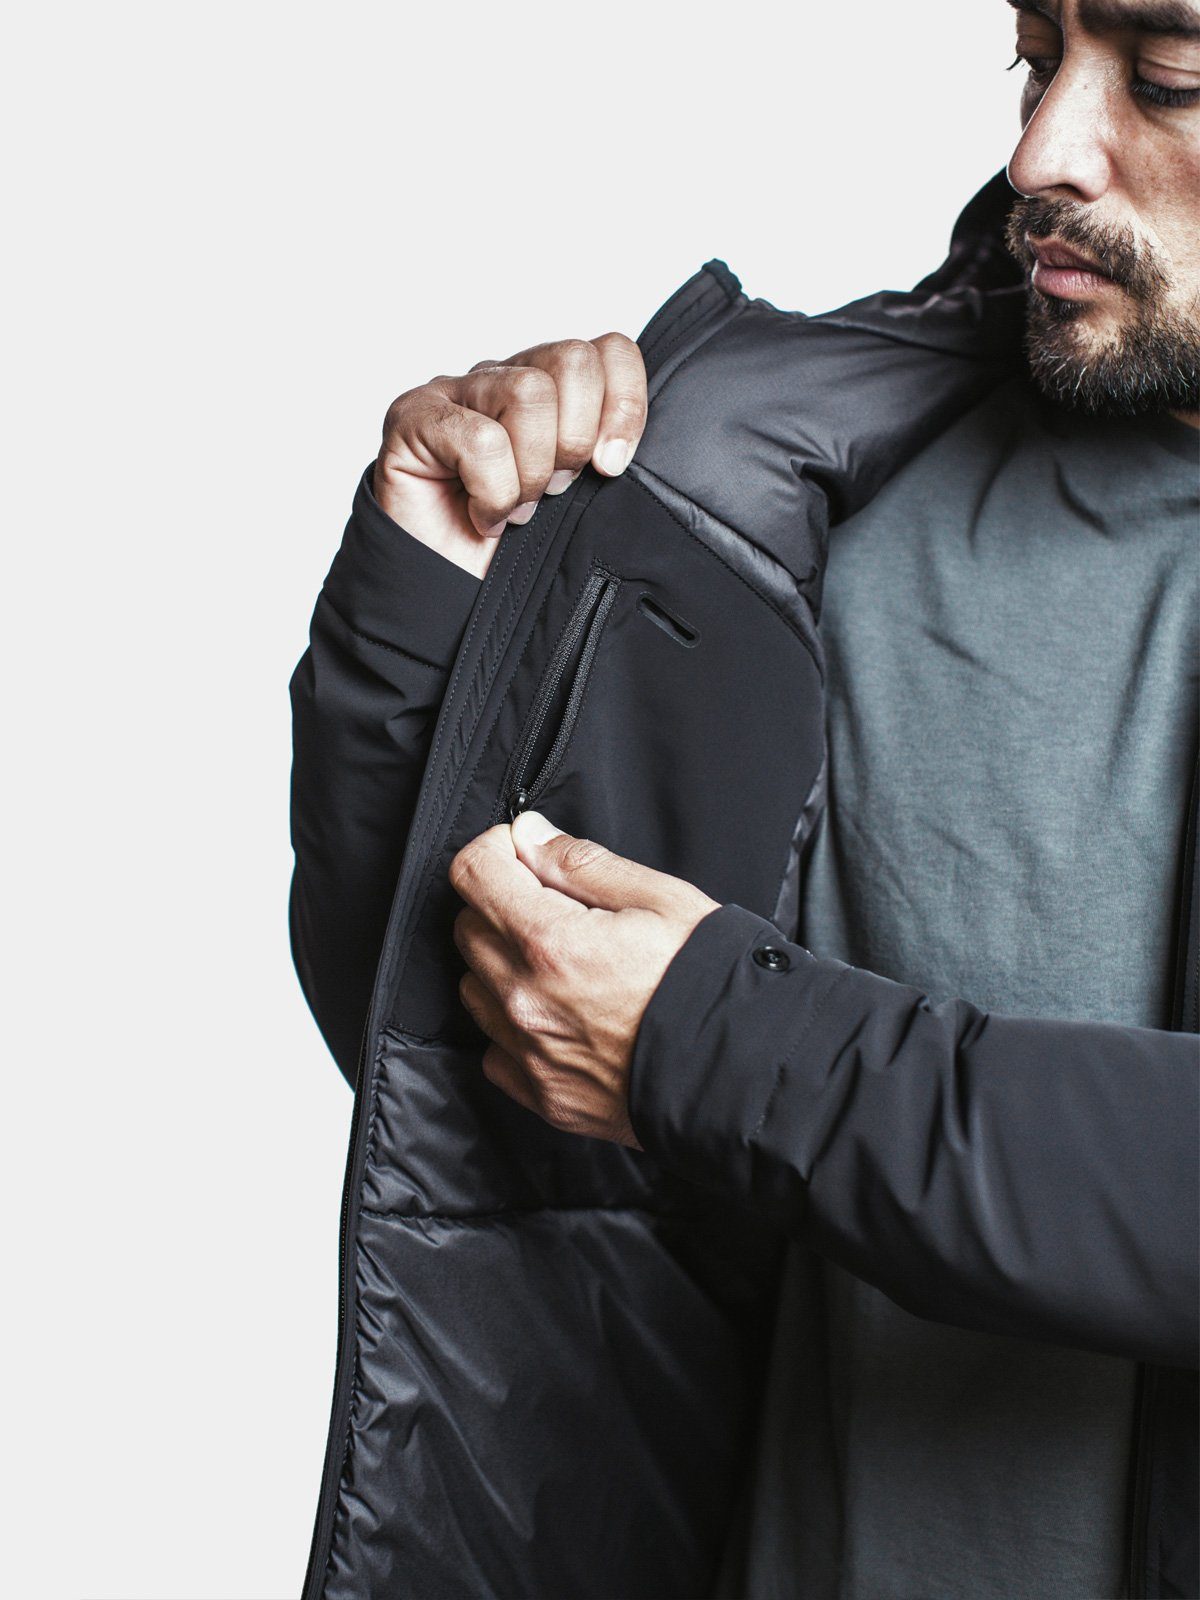 Rhite by Mission Workshop - Weatherproof Bags & Technical Apparel - San Francisco & Los Angeles - Built to endure - Guaranteed forever